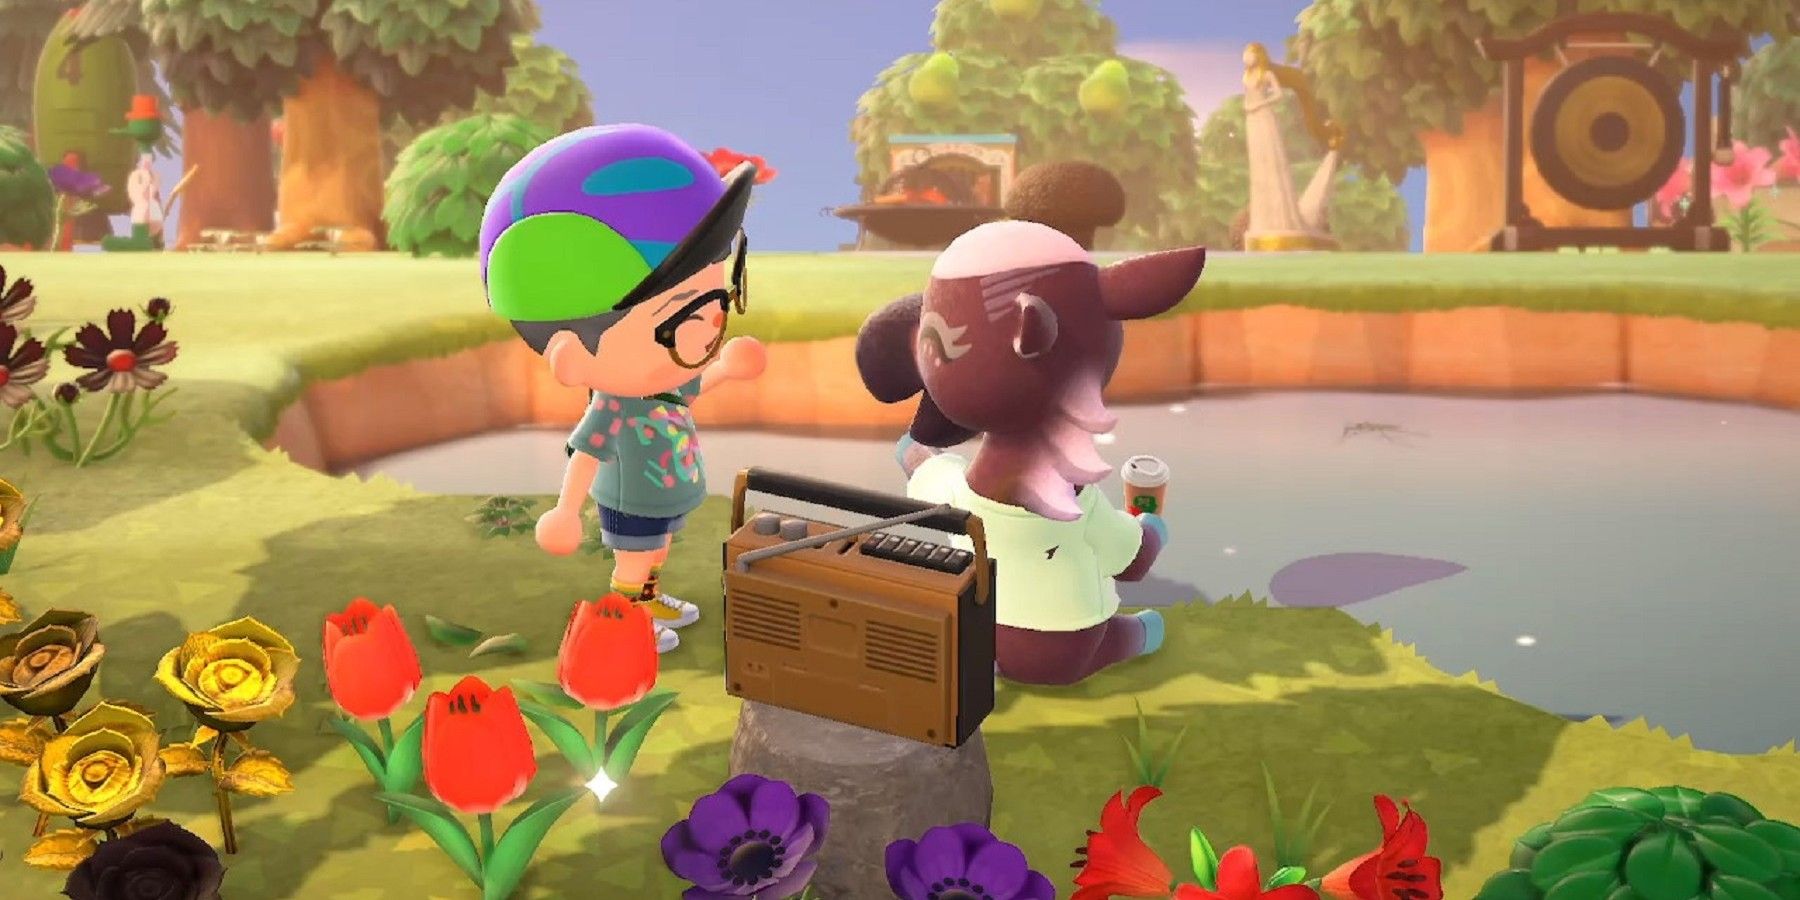 This Fan’s Animal Crossing Game Concept Would Be a Perfect New Horizons Sequel